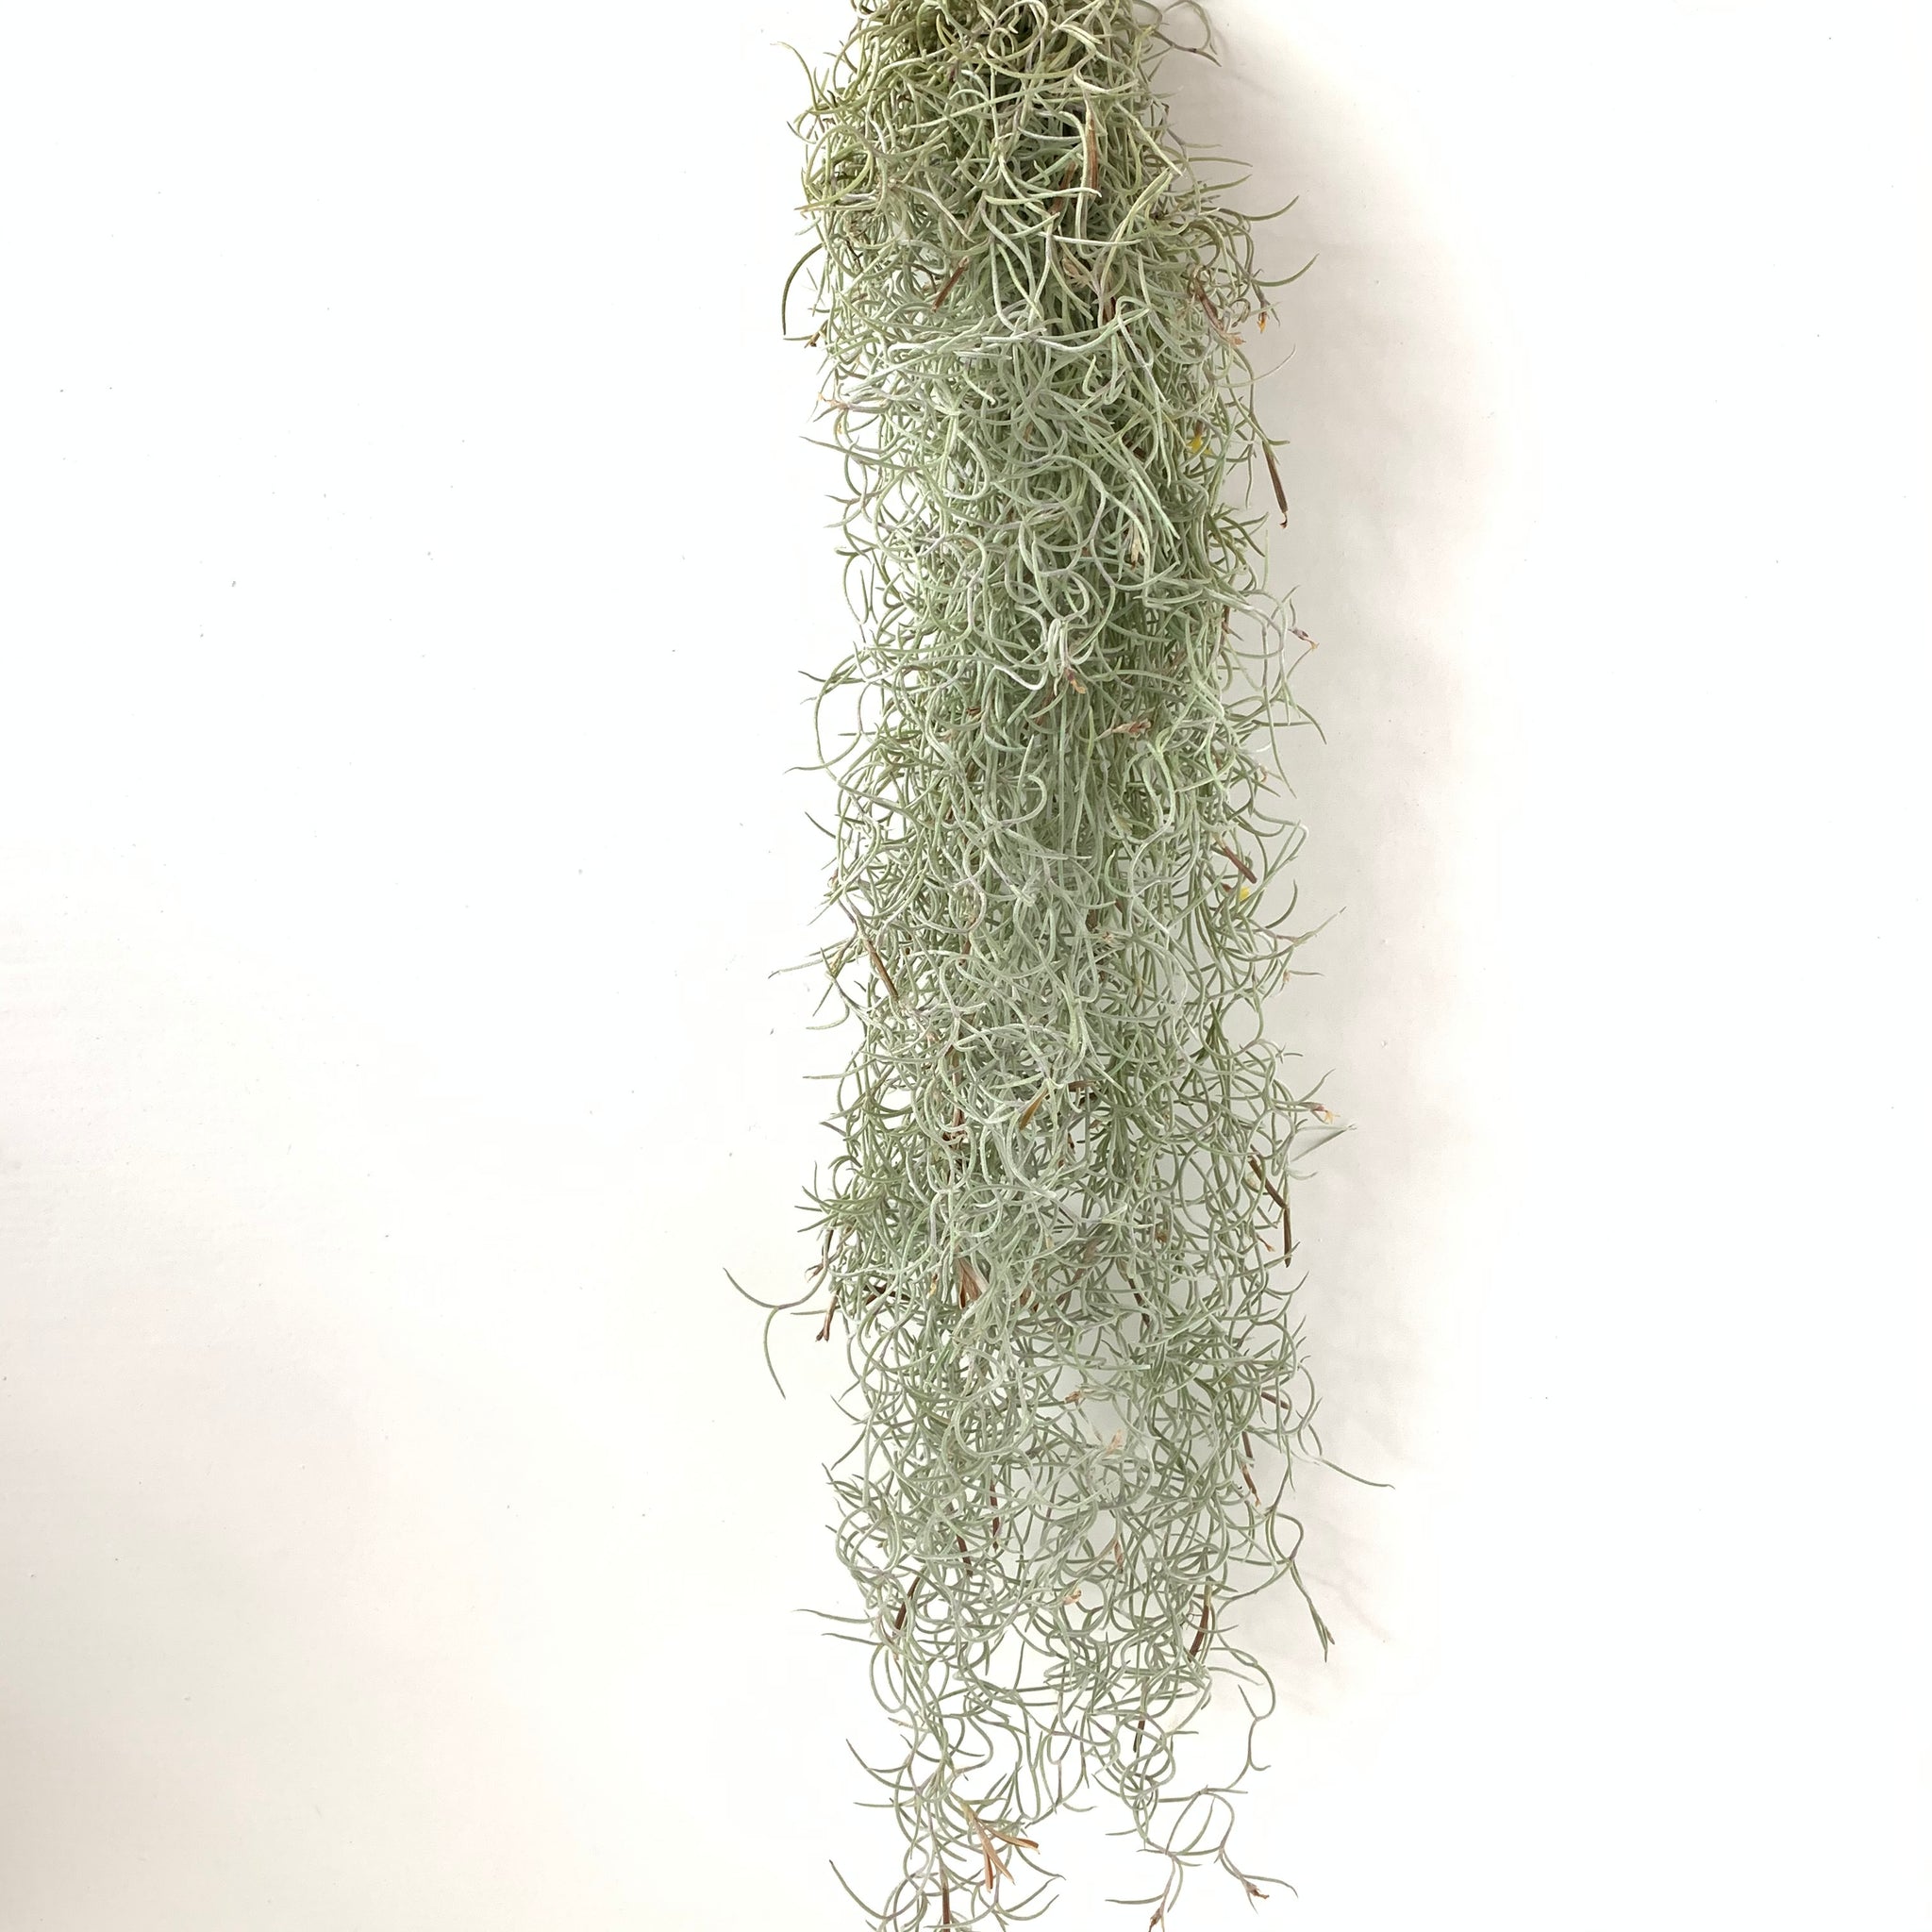 Spanish Moss Rare Curly Form - Fragrant Orange Blossoms – The